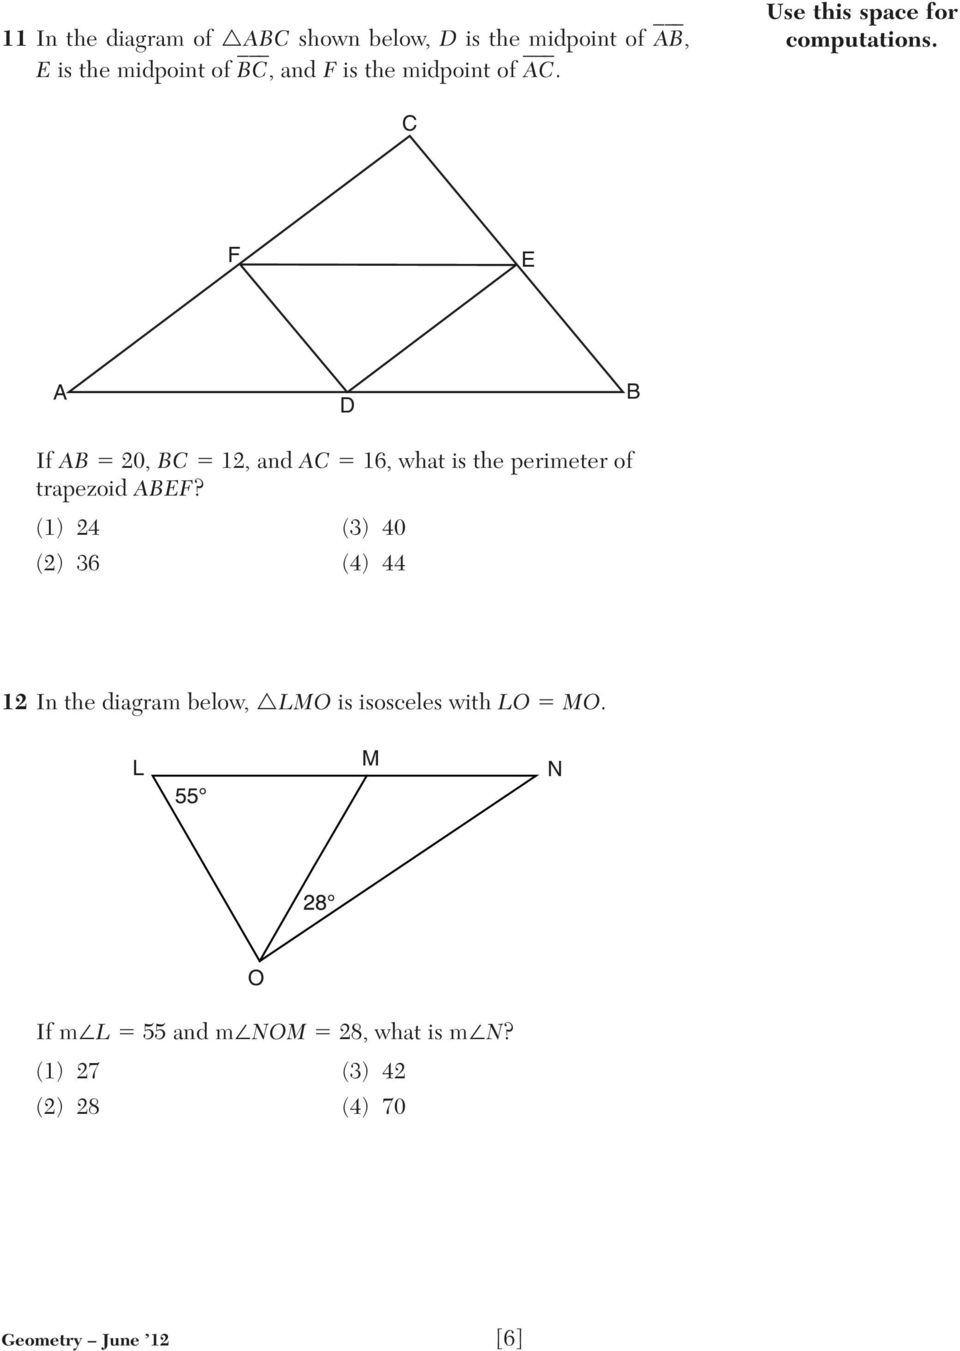 C F E A D B If AB 20, BC 12, and AC 16, what is the perimeter of trapezoid ABEF?